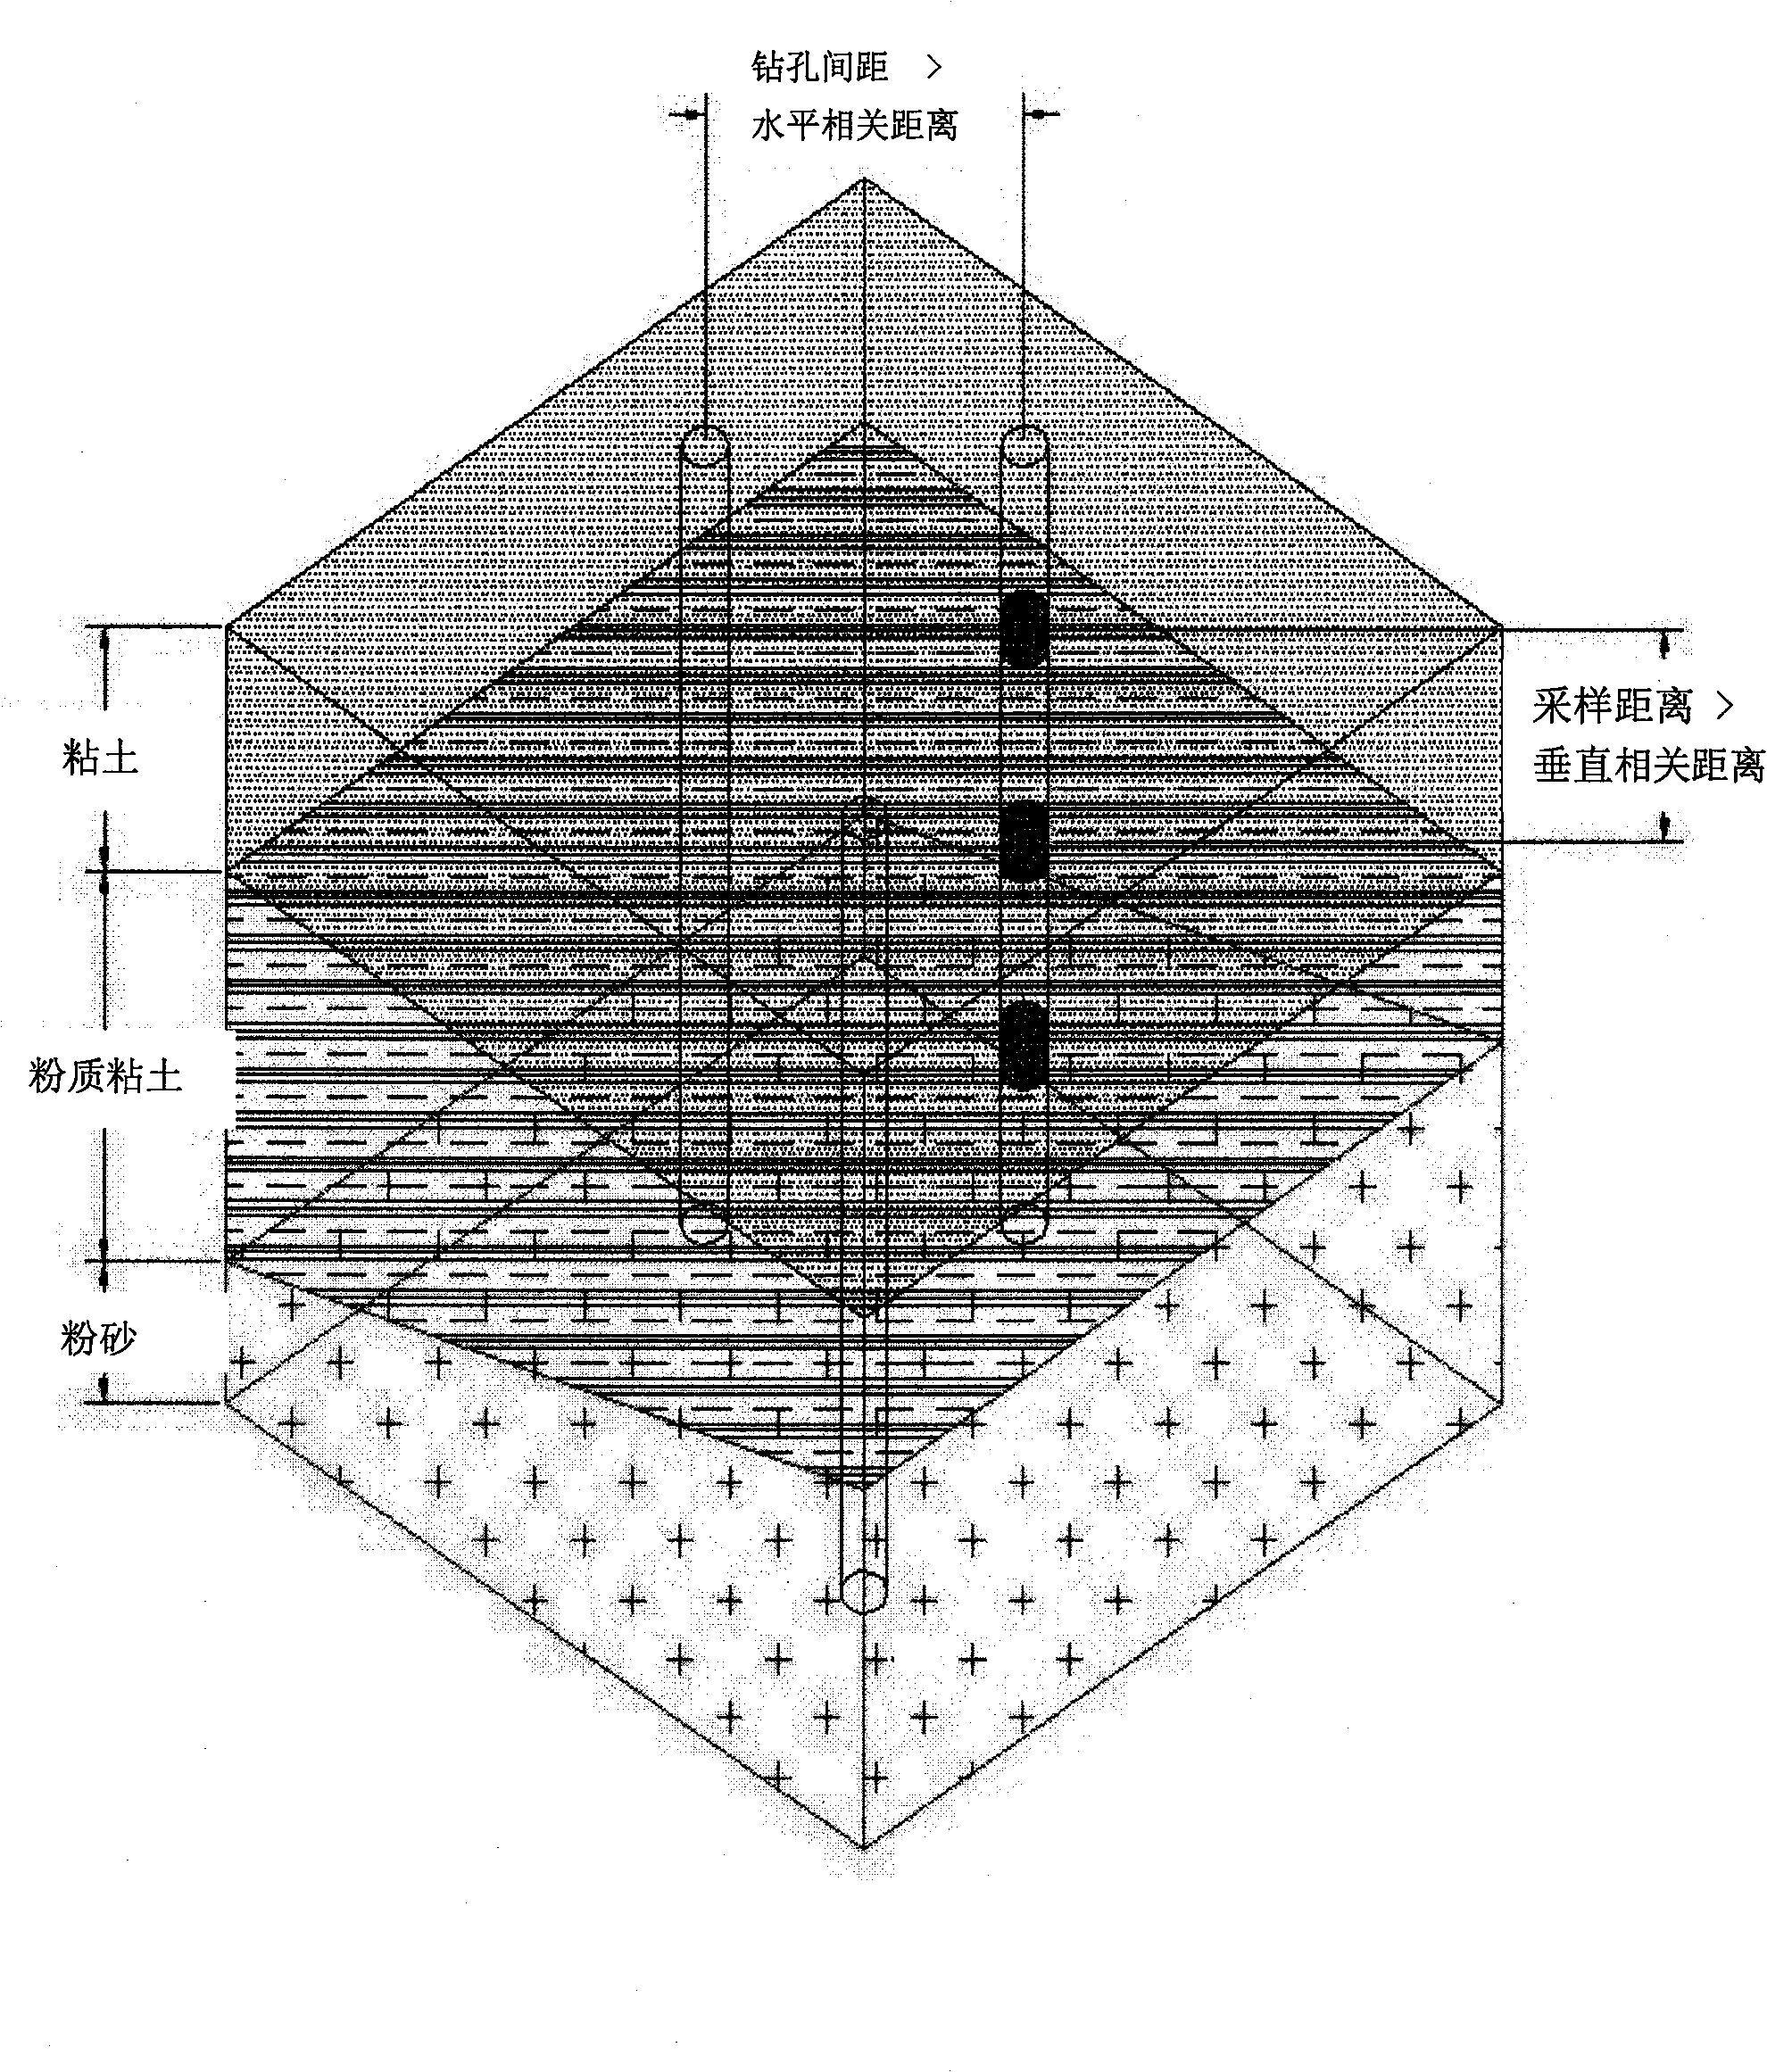 Technique and method for geotechnical engineering investigation and sampling based on soil variability